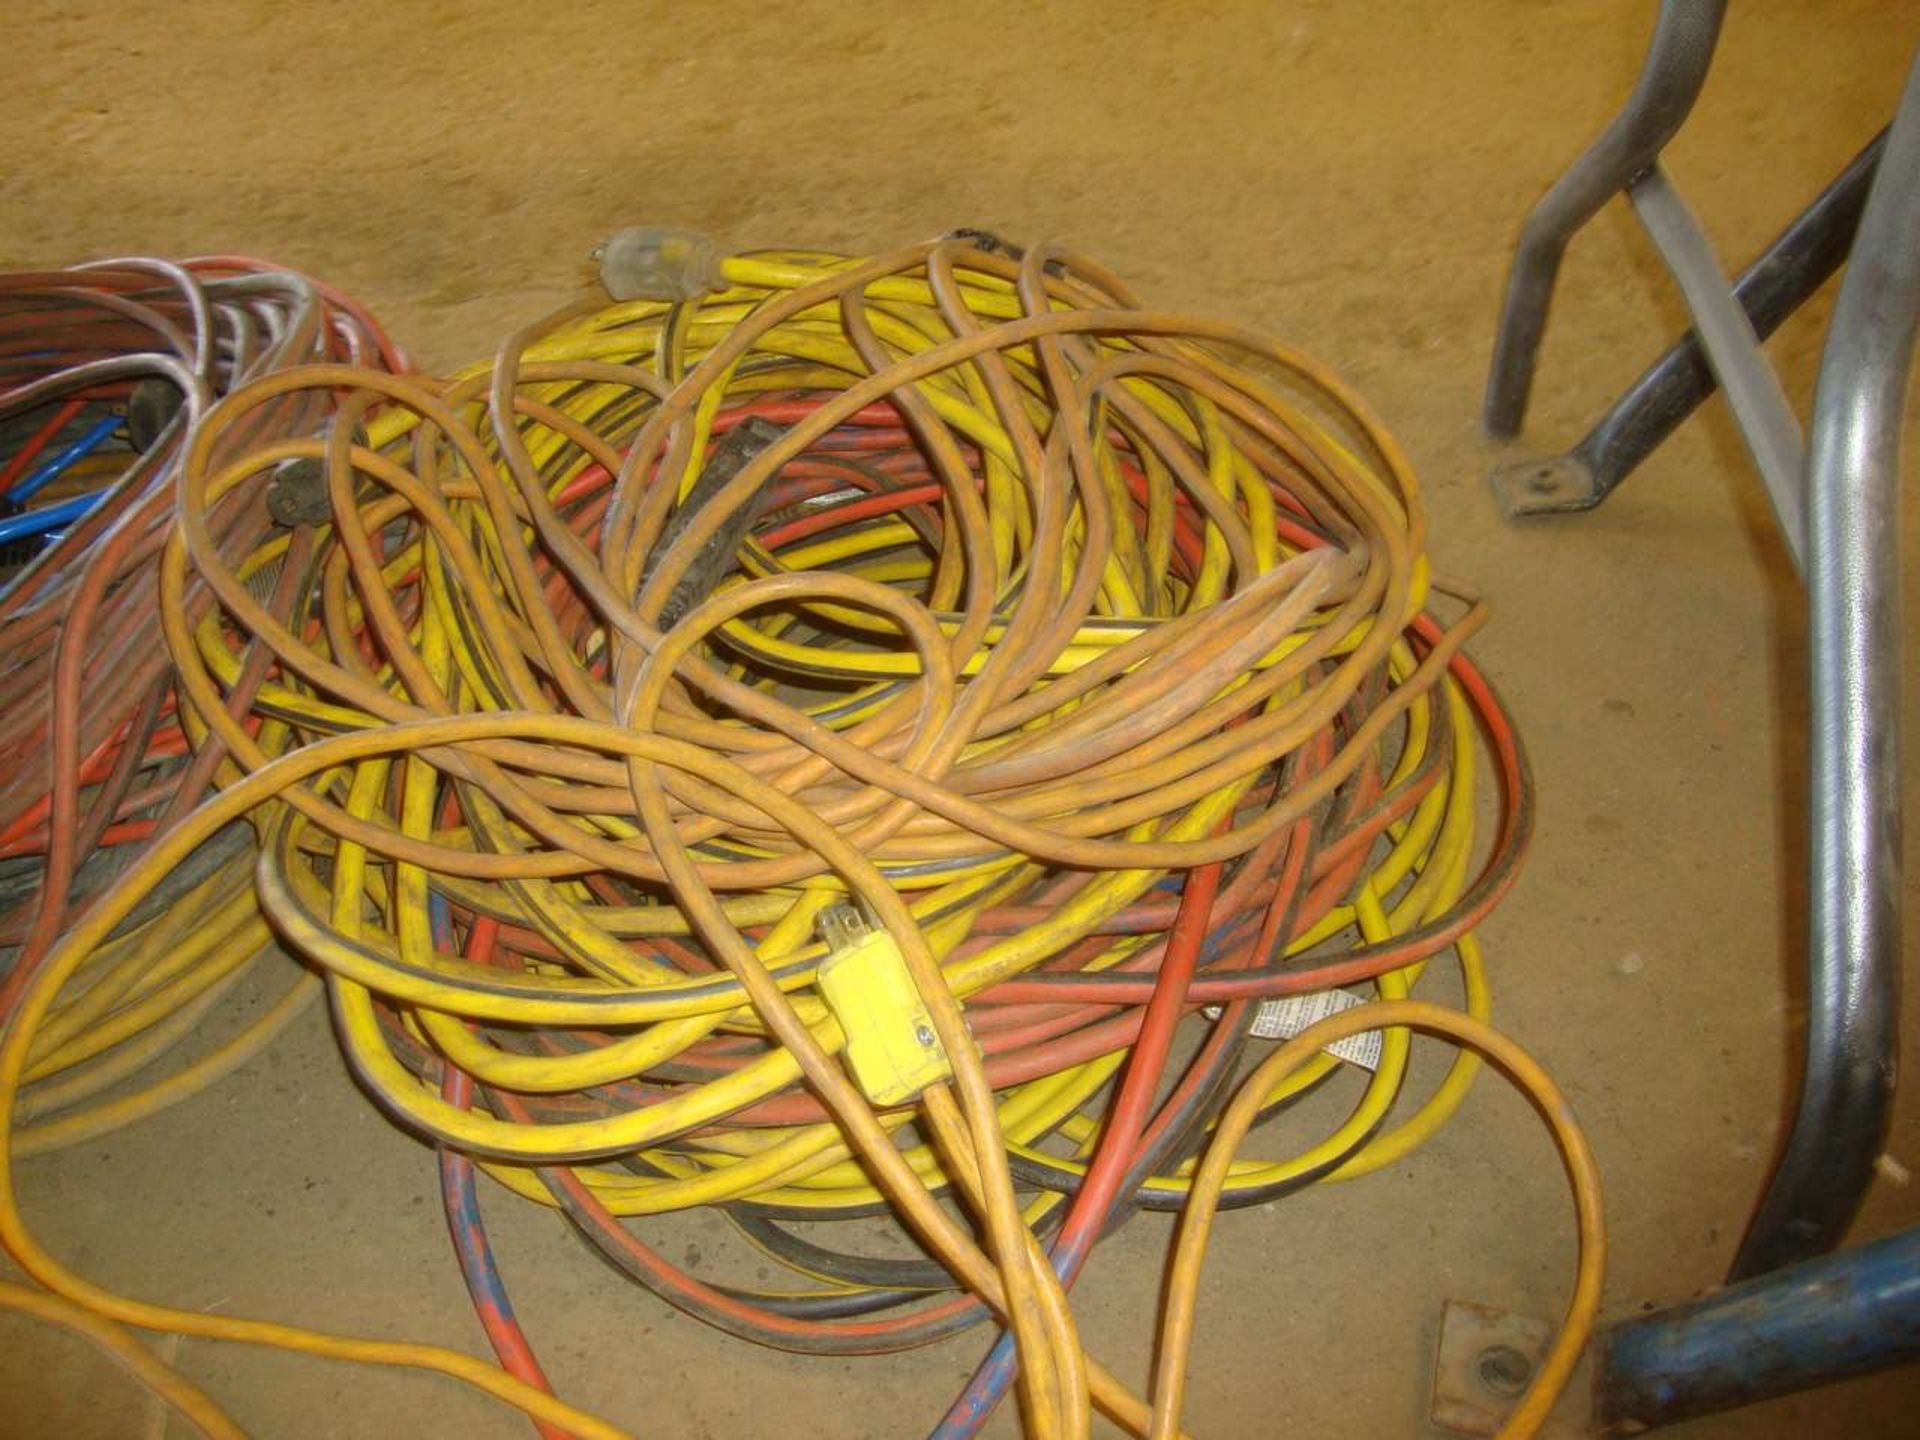 Lot of extention cords